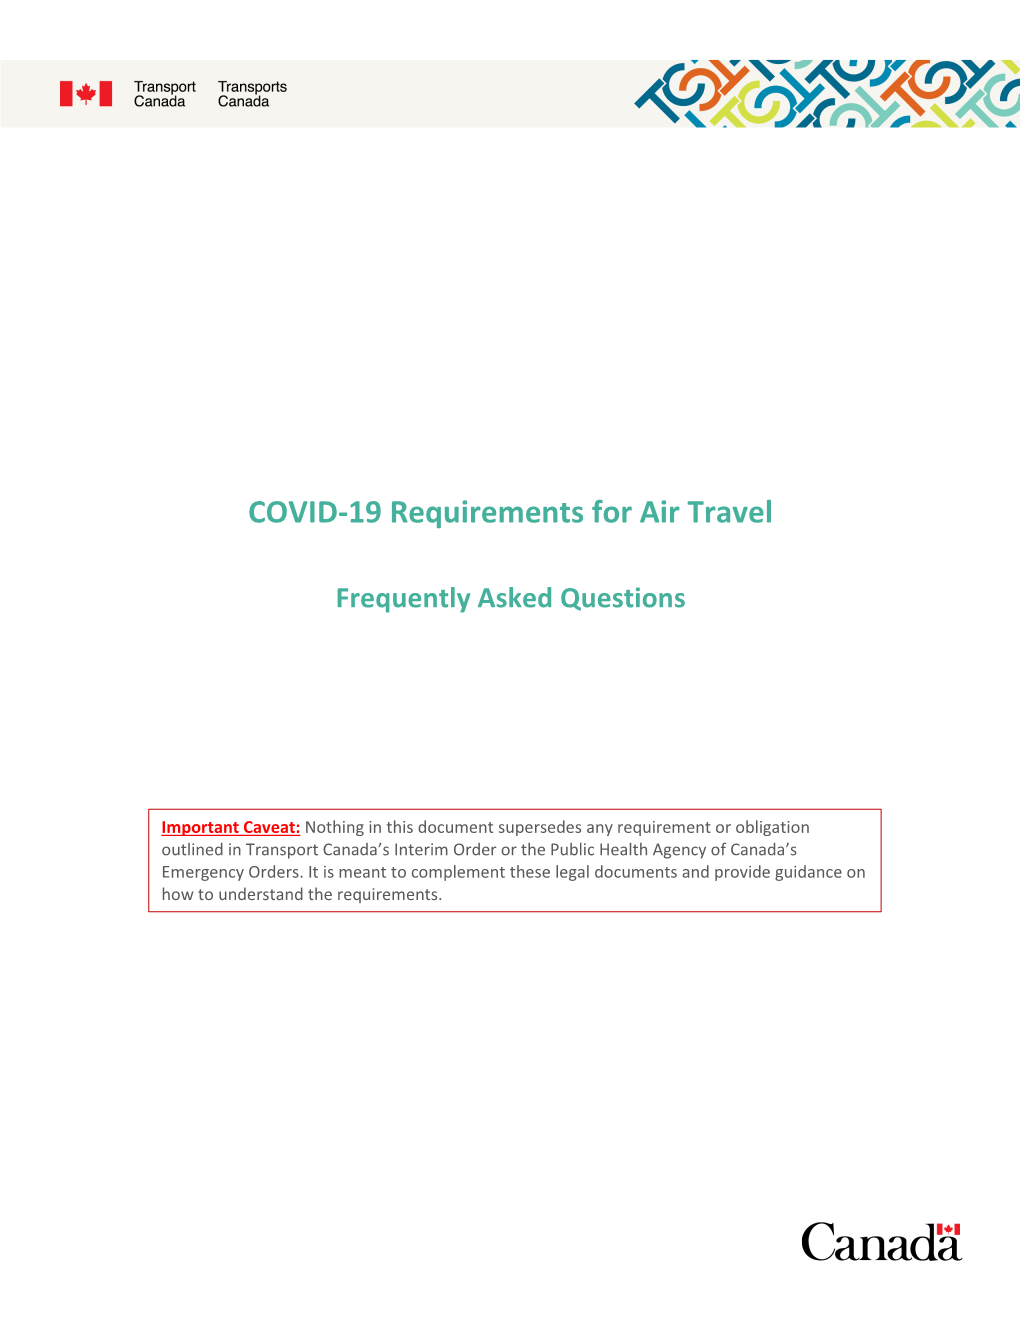 COVID-19 Requirements for Air Travel